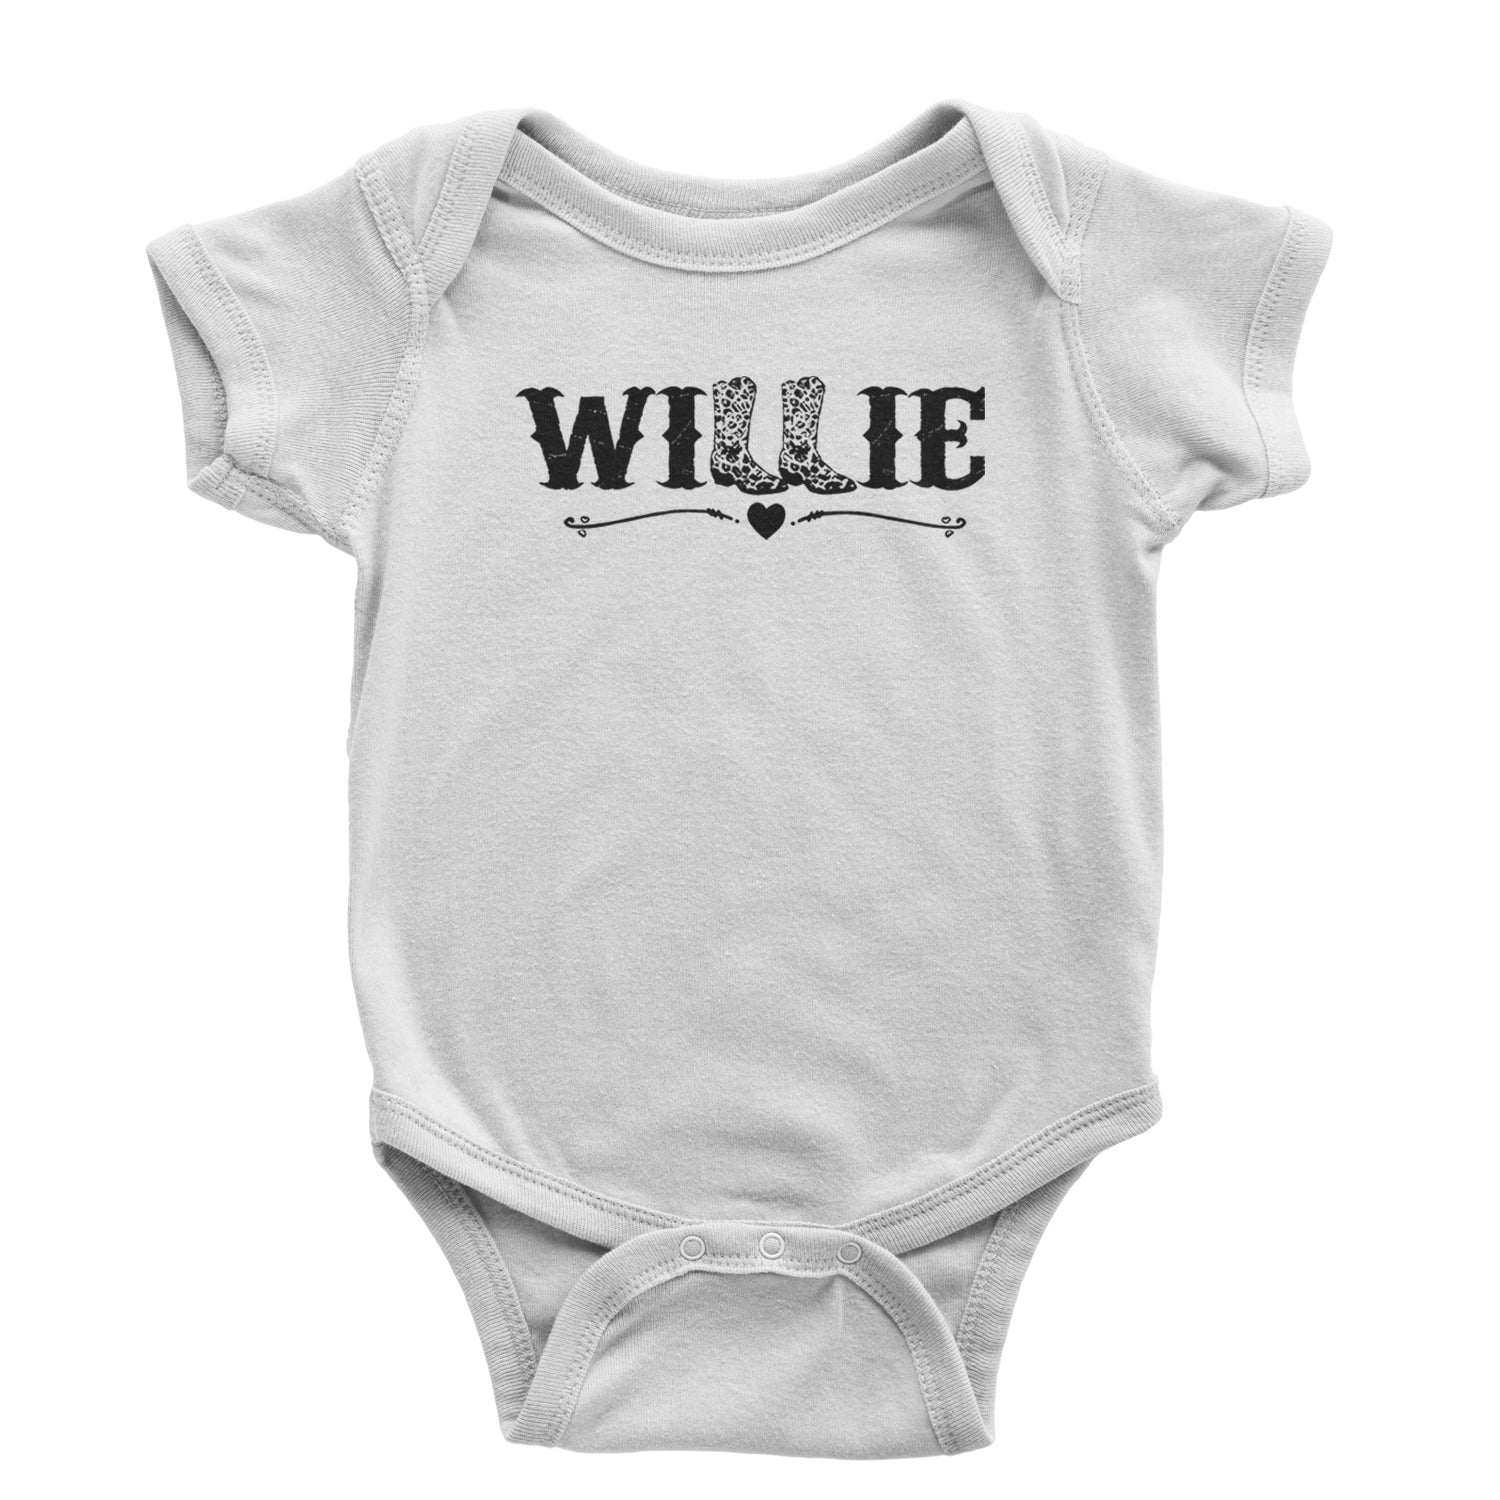 Willie Cowboy Boots Hippy Country Music Infant One-Piece Romper Bodysuit and Toddler T-shirt